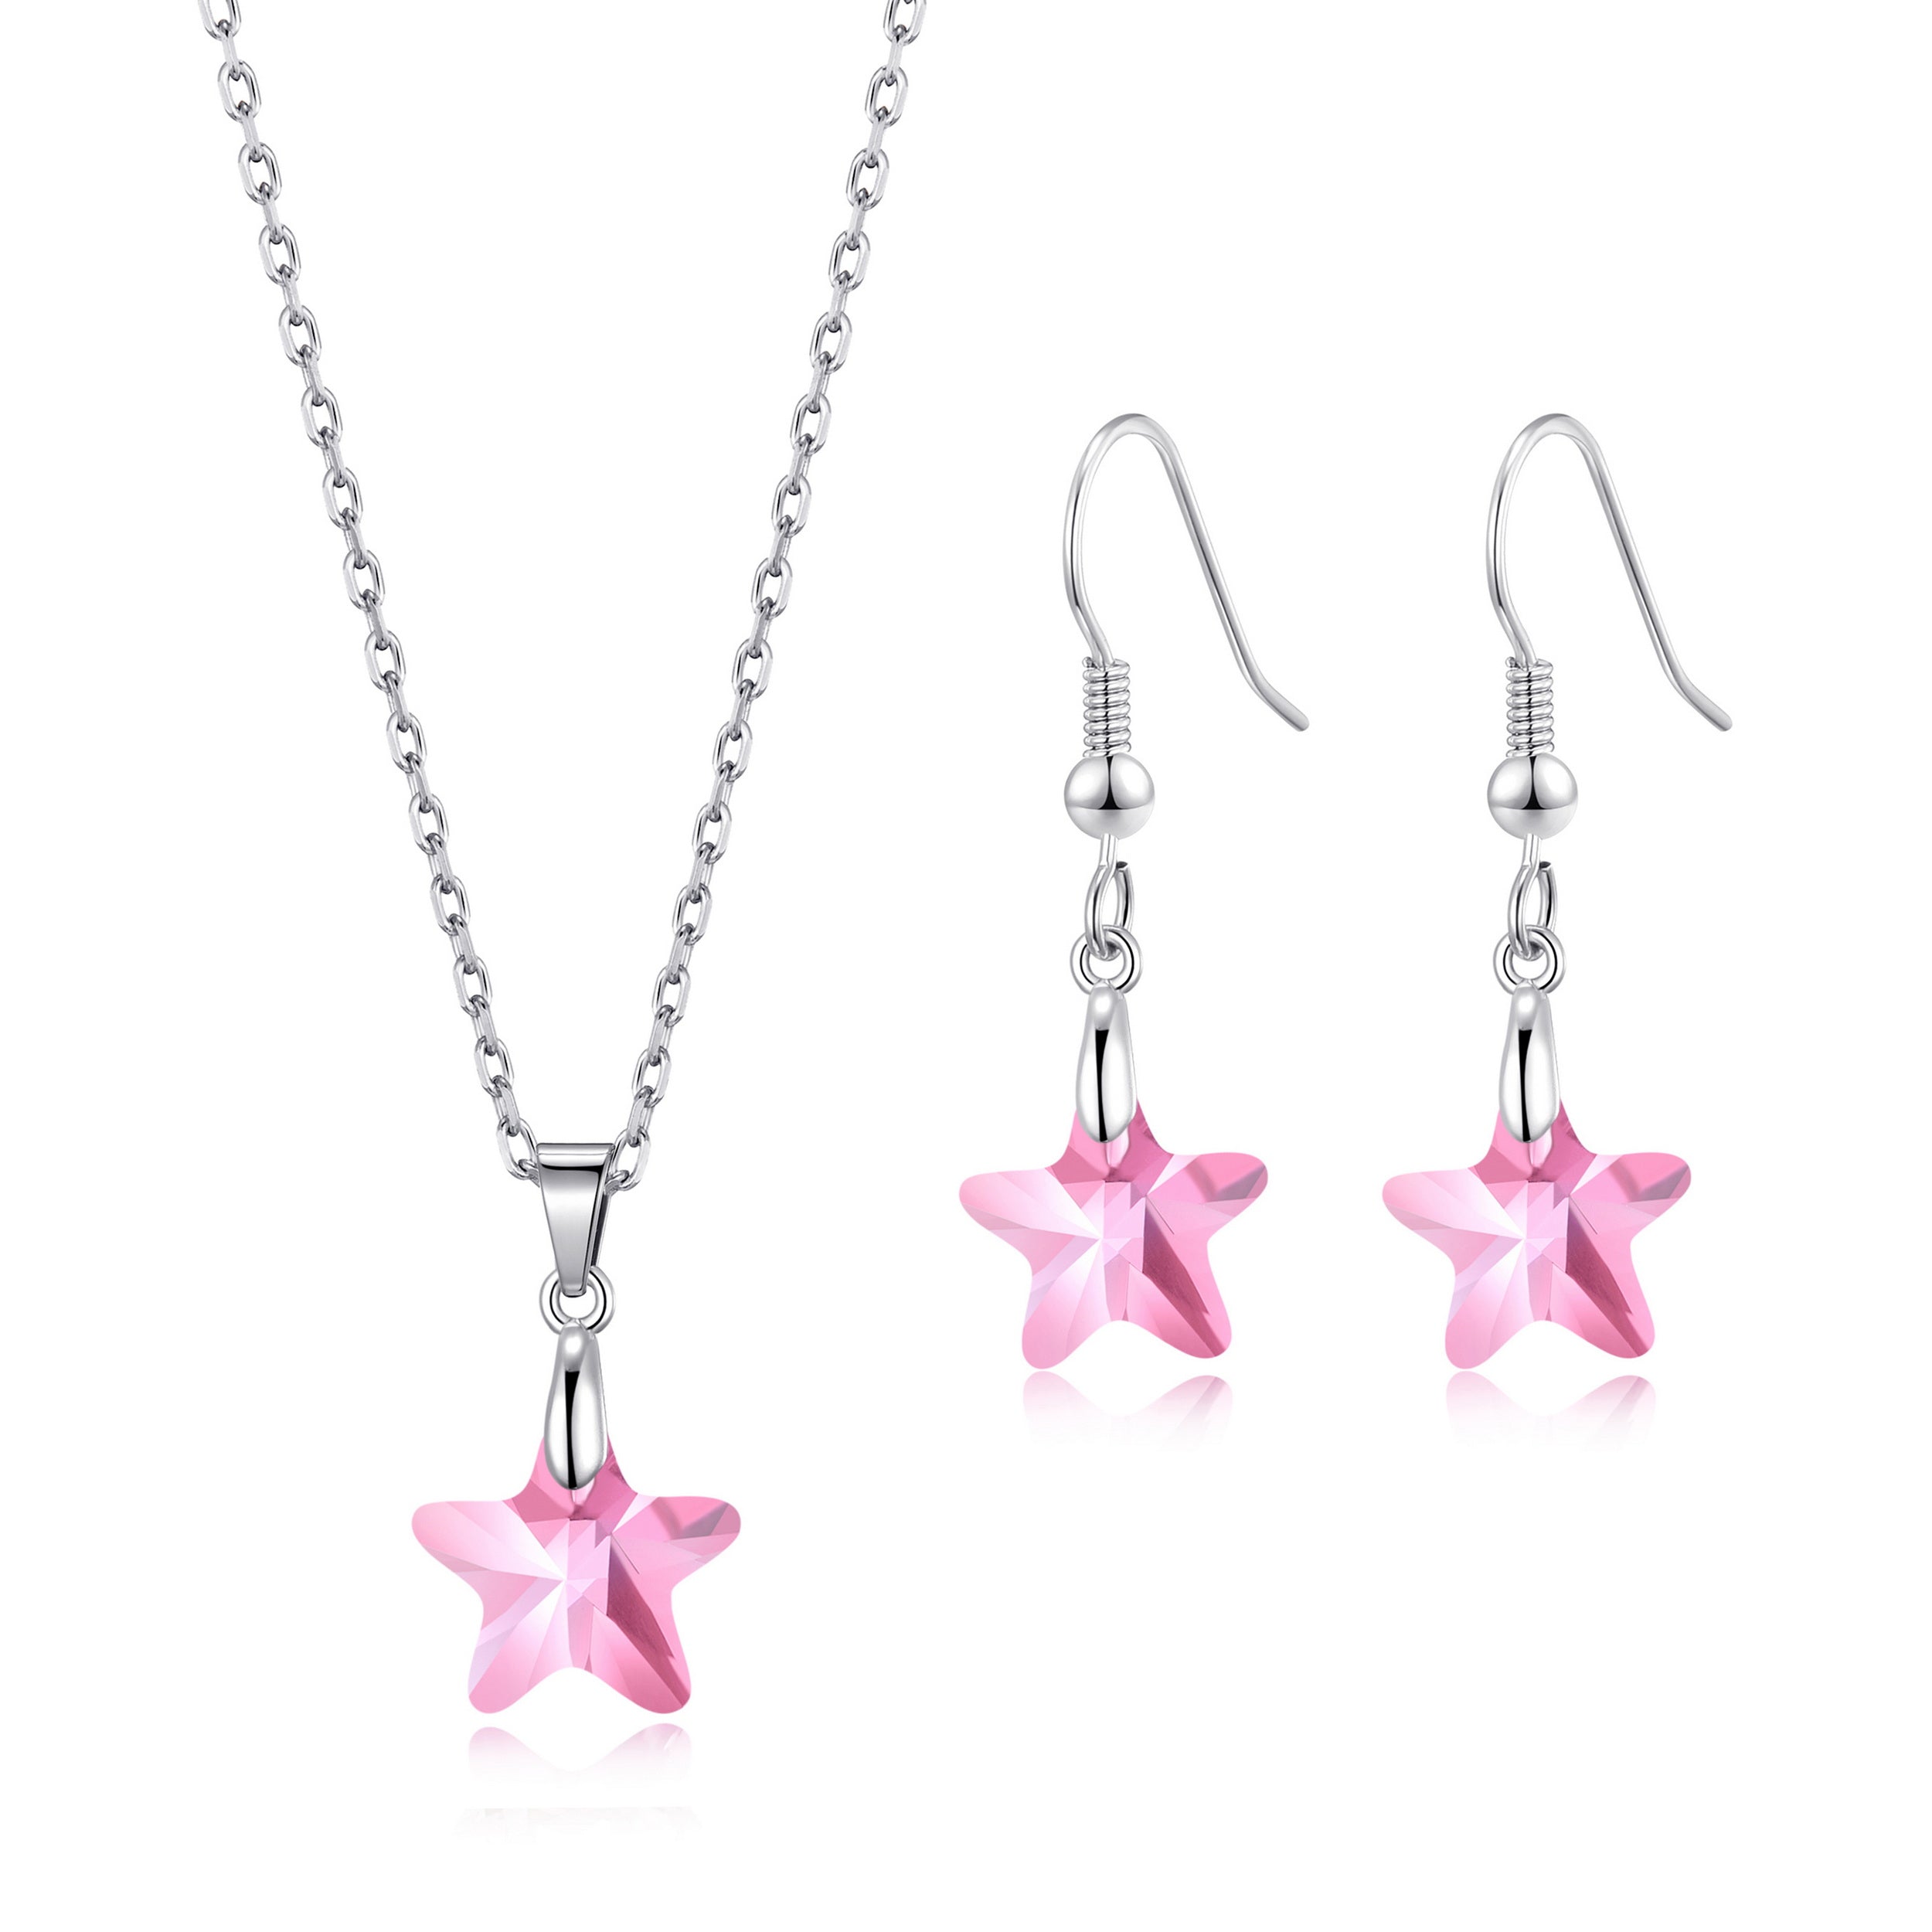 Sterling Silver Light Rose Star Set Created with Zircondia® Crystals by Philip Jones Jewellery